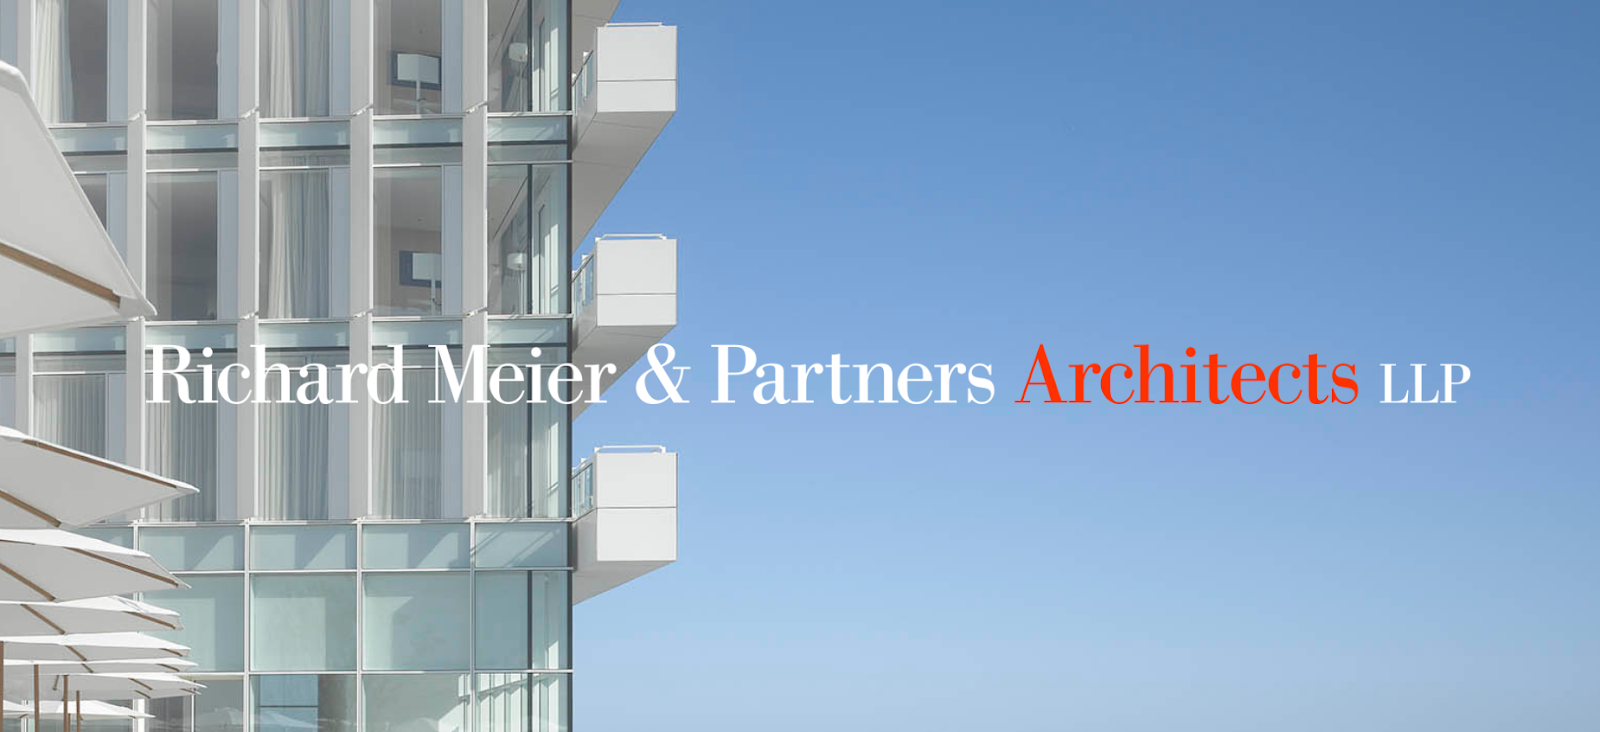 Richard Meier & Partners Architects LLP splash page showing an edge view of a condo high rise all in white and soft blue